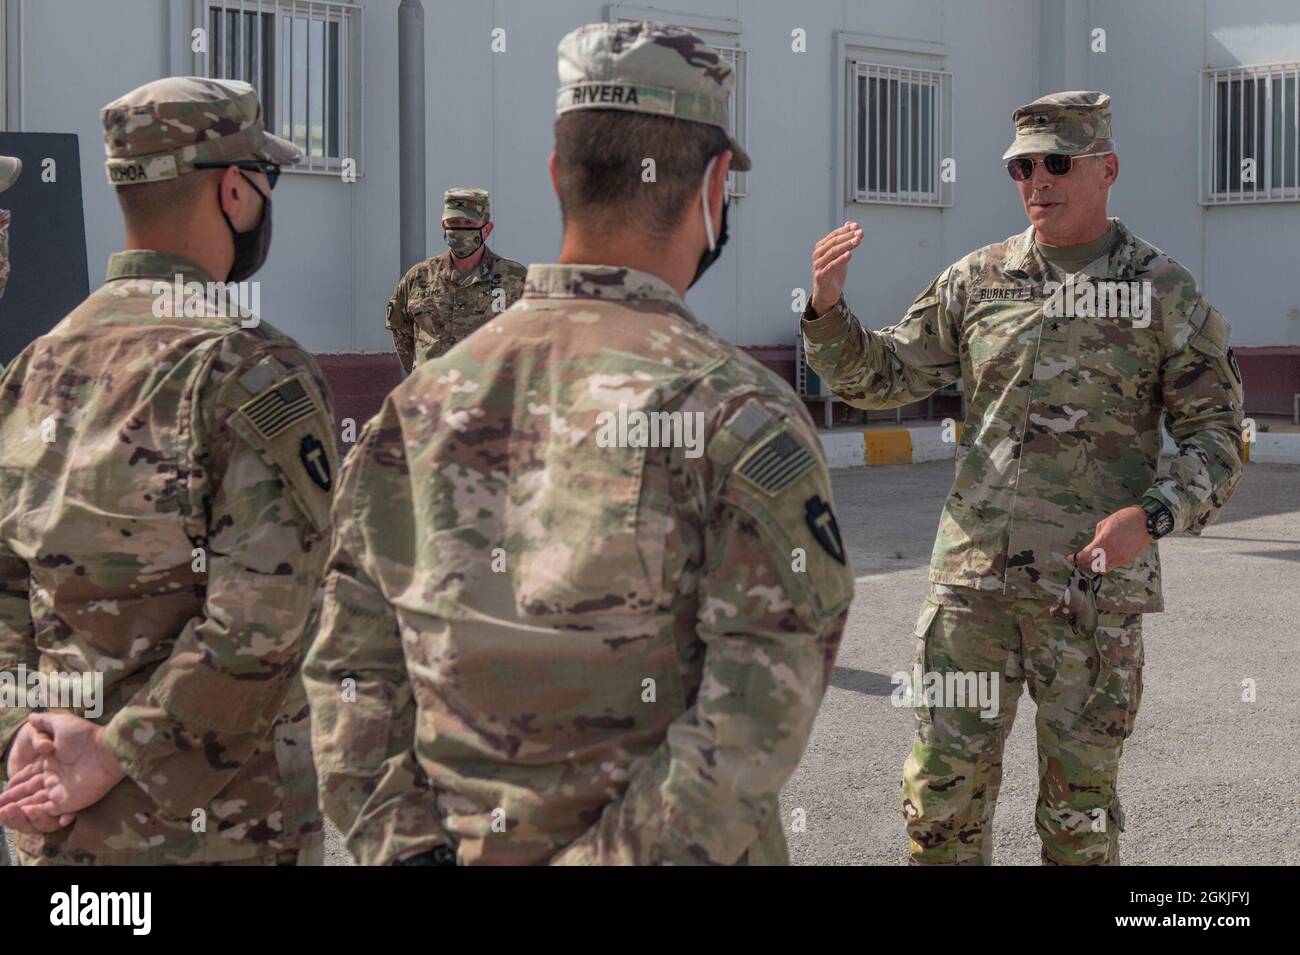 U.S. Army Soldiers from Task Force Spartan earn their right sleeve insignia during a ceremony hosted by the Division Tactical-Jordan Officer in Charge, Col. Christopher Fletcher and Sgt. Maj. Daniel Johnson for Division Tactical, at the Joint Training Center, May 3, 2021. Brig. Gen. Win Burkett, Task Force Spartan Assistant Commanding General- Operations spoke a few words commemorating their special day. Stock Photo